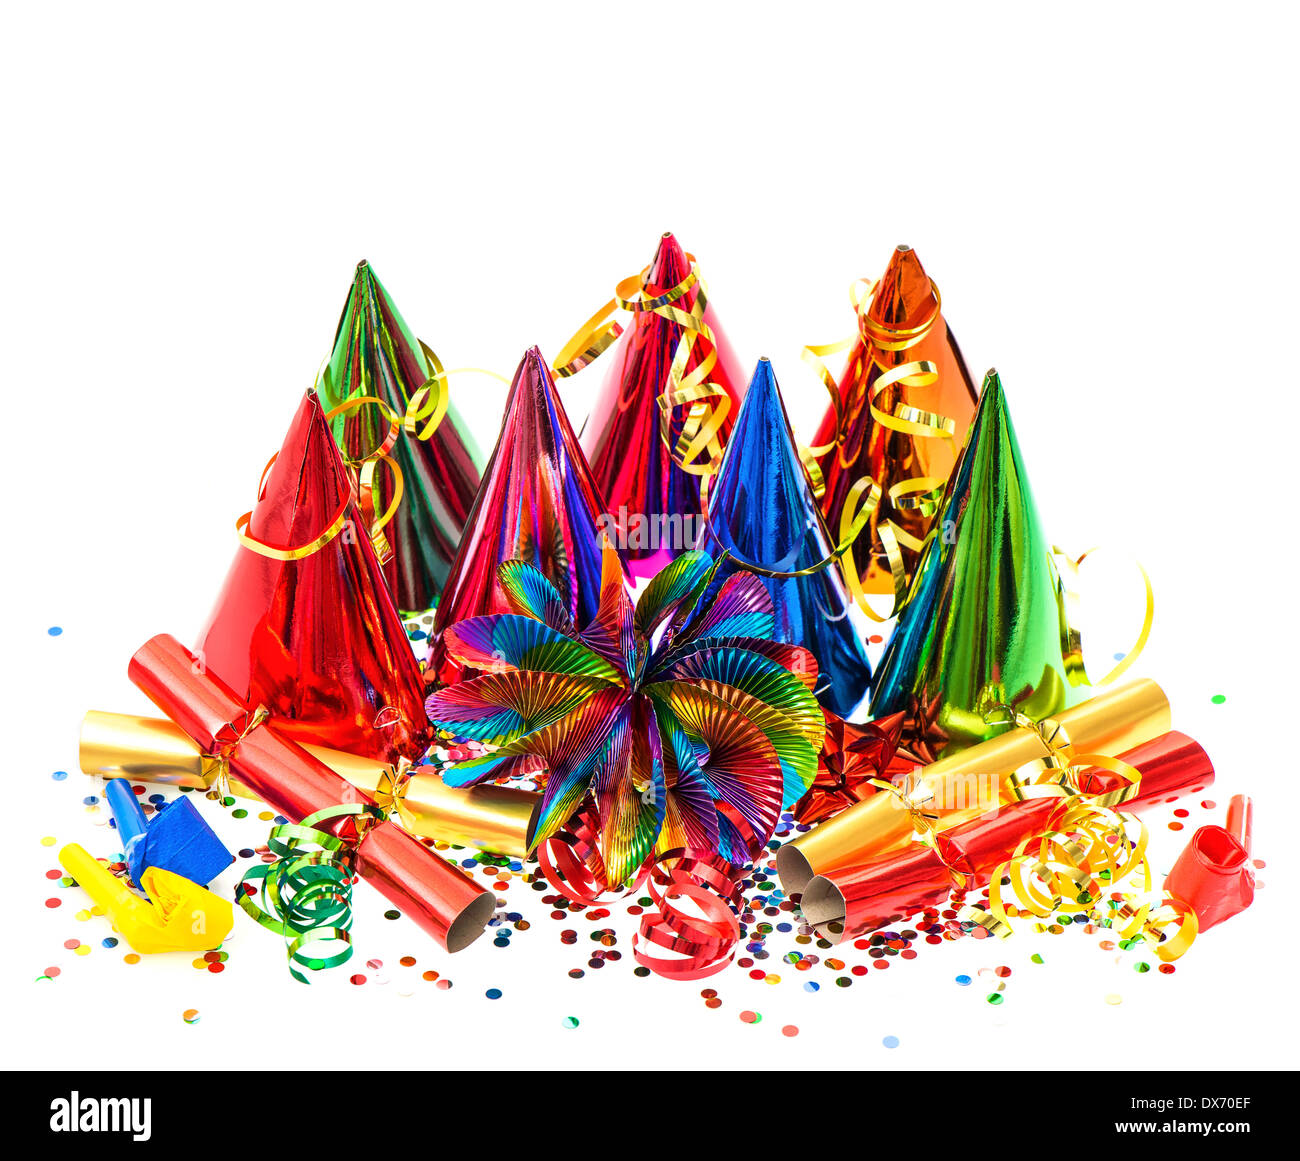 colorful garlands, streamer, party hats and confetti on white background. carnival decoration Stock Photo